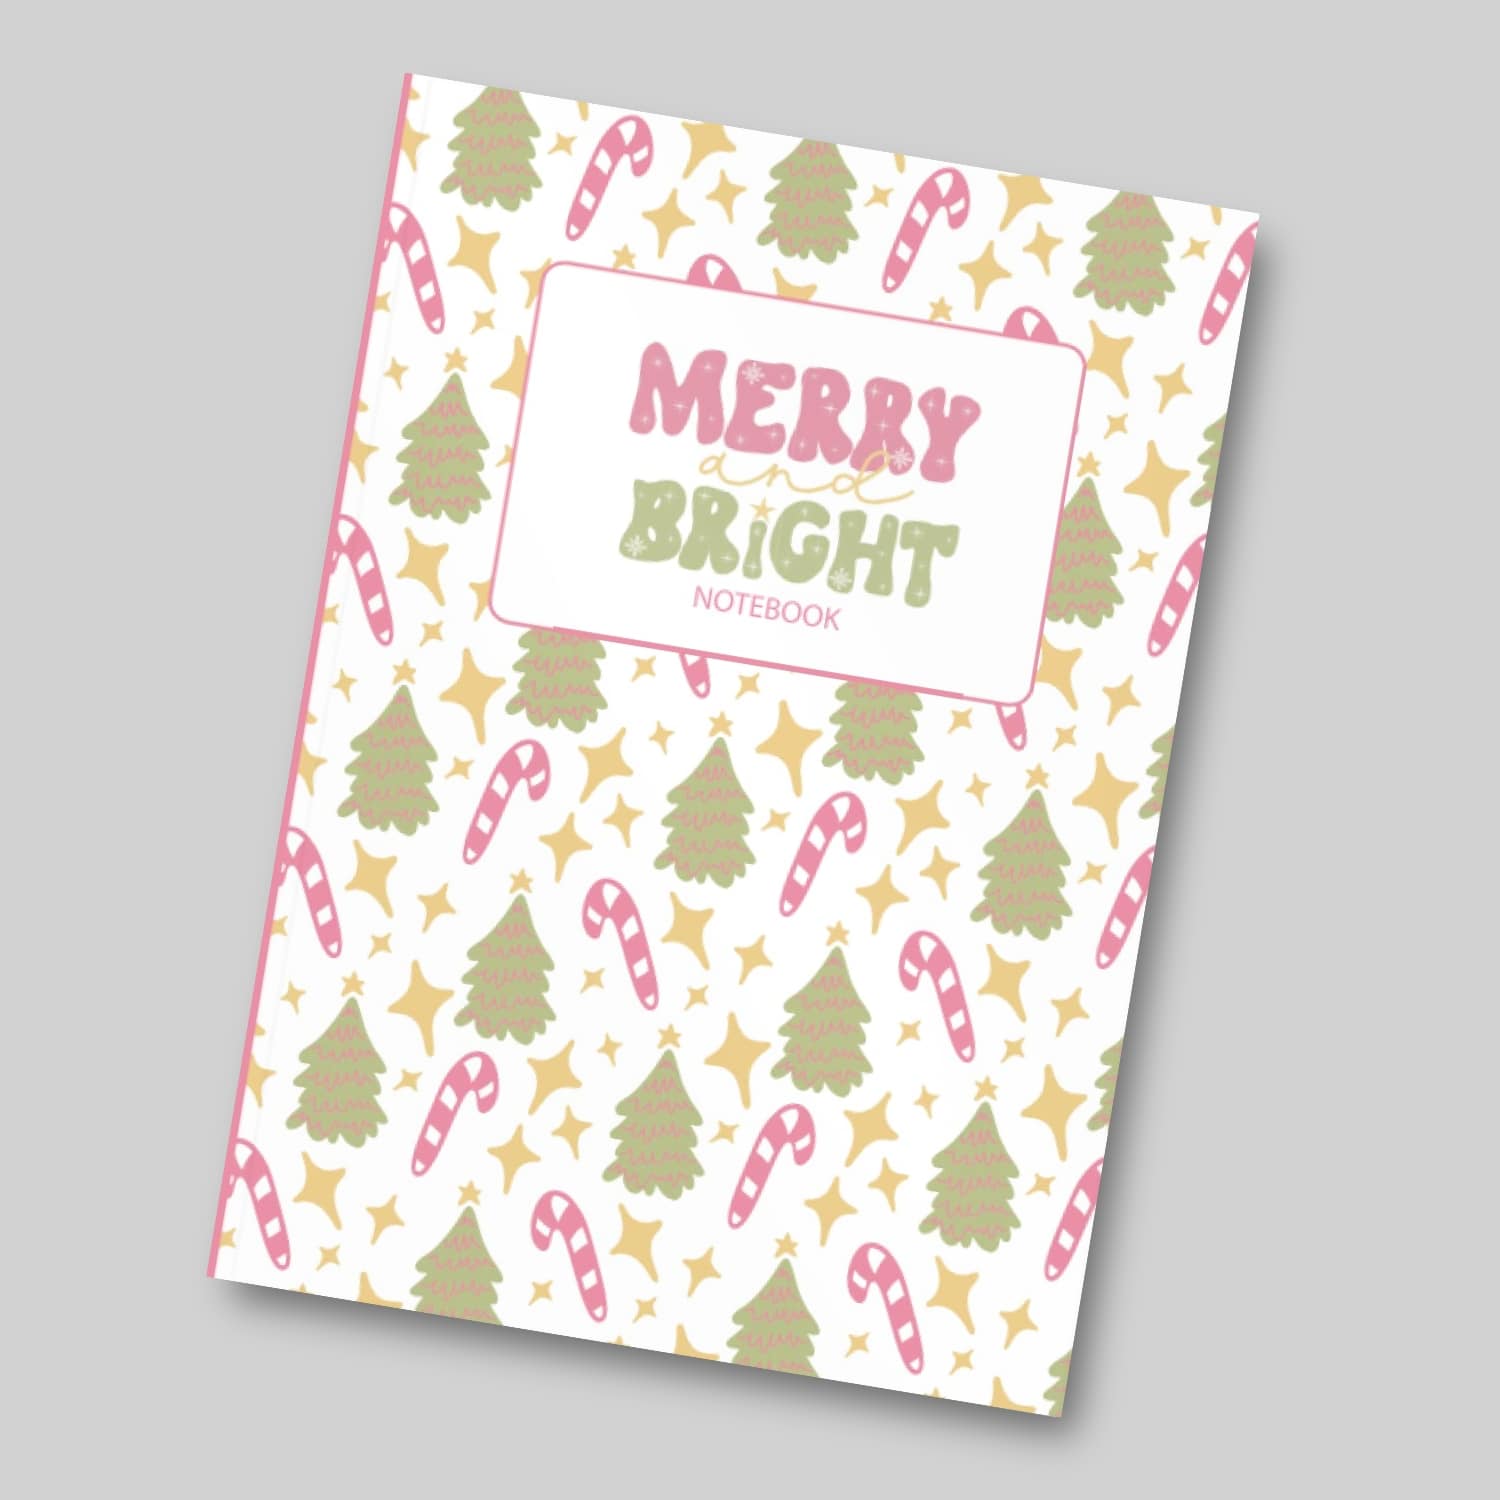 Merry and Bright KDP book